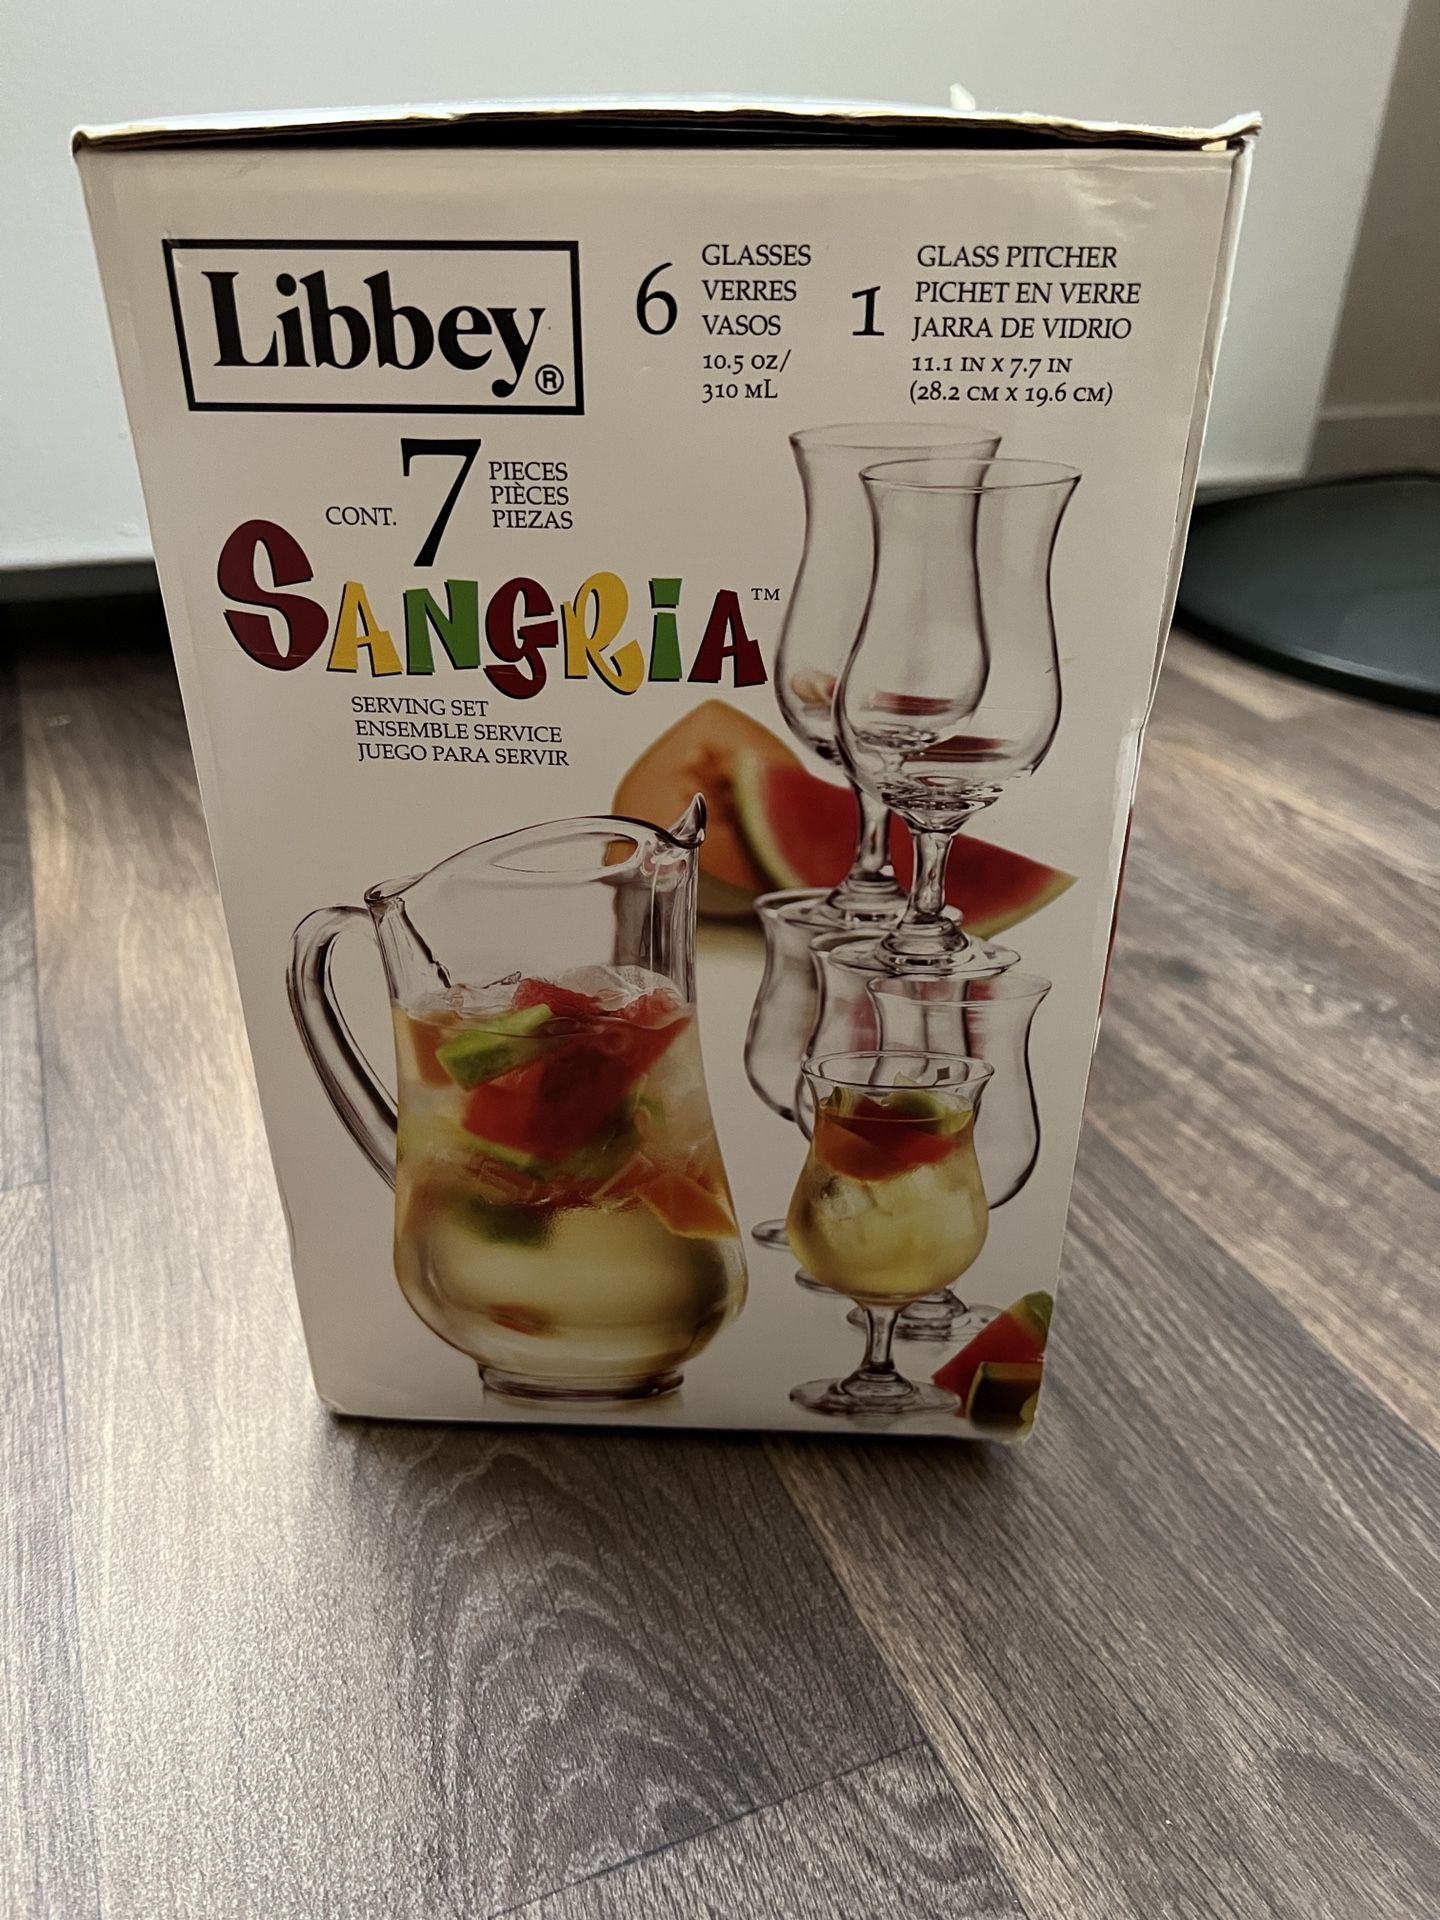 Libbey 7 Piece Sangria Pitcher and Glasses Set